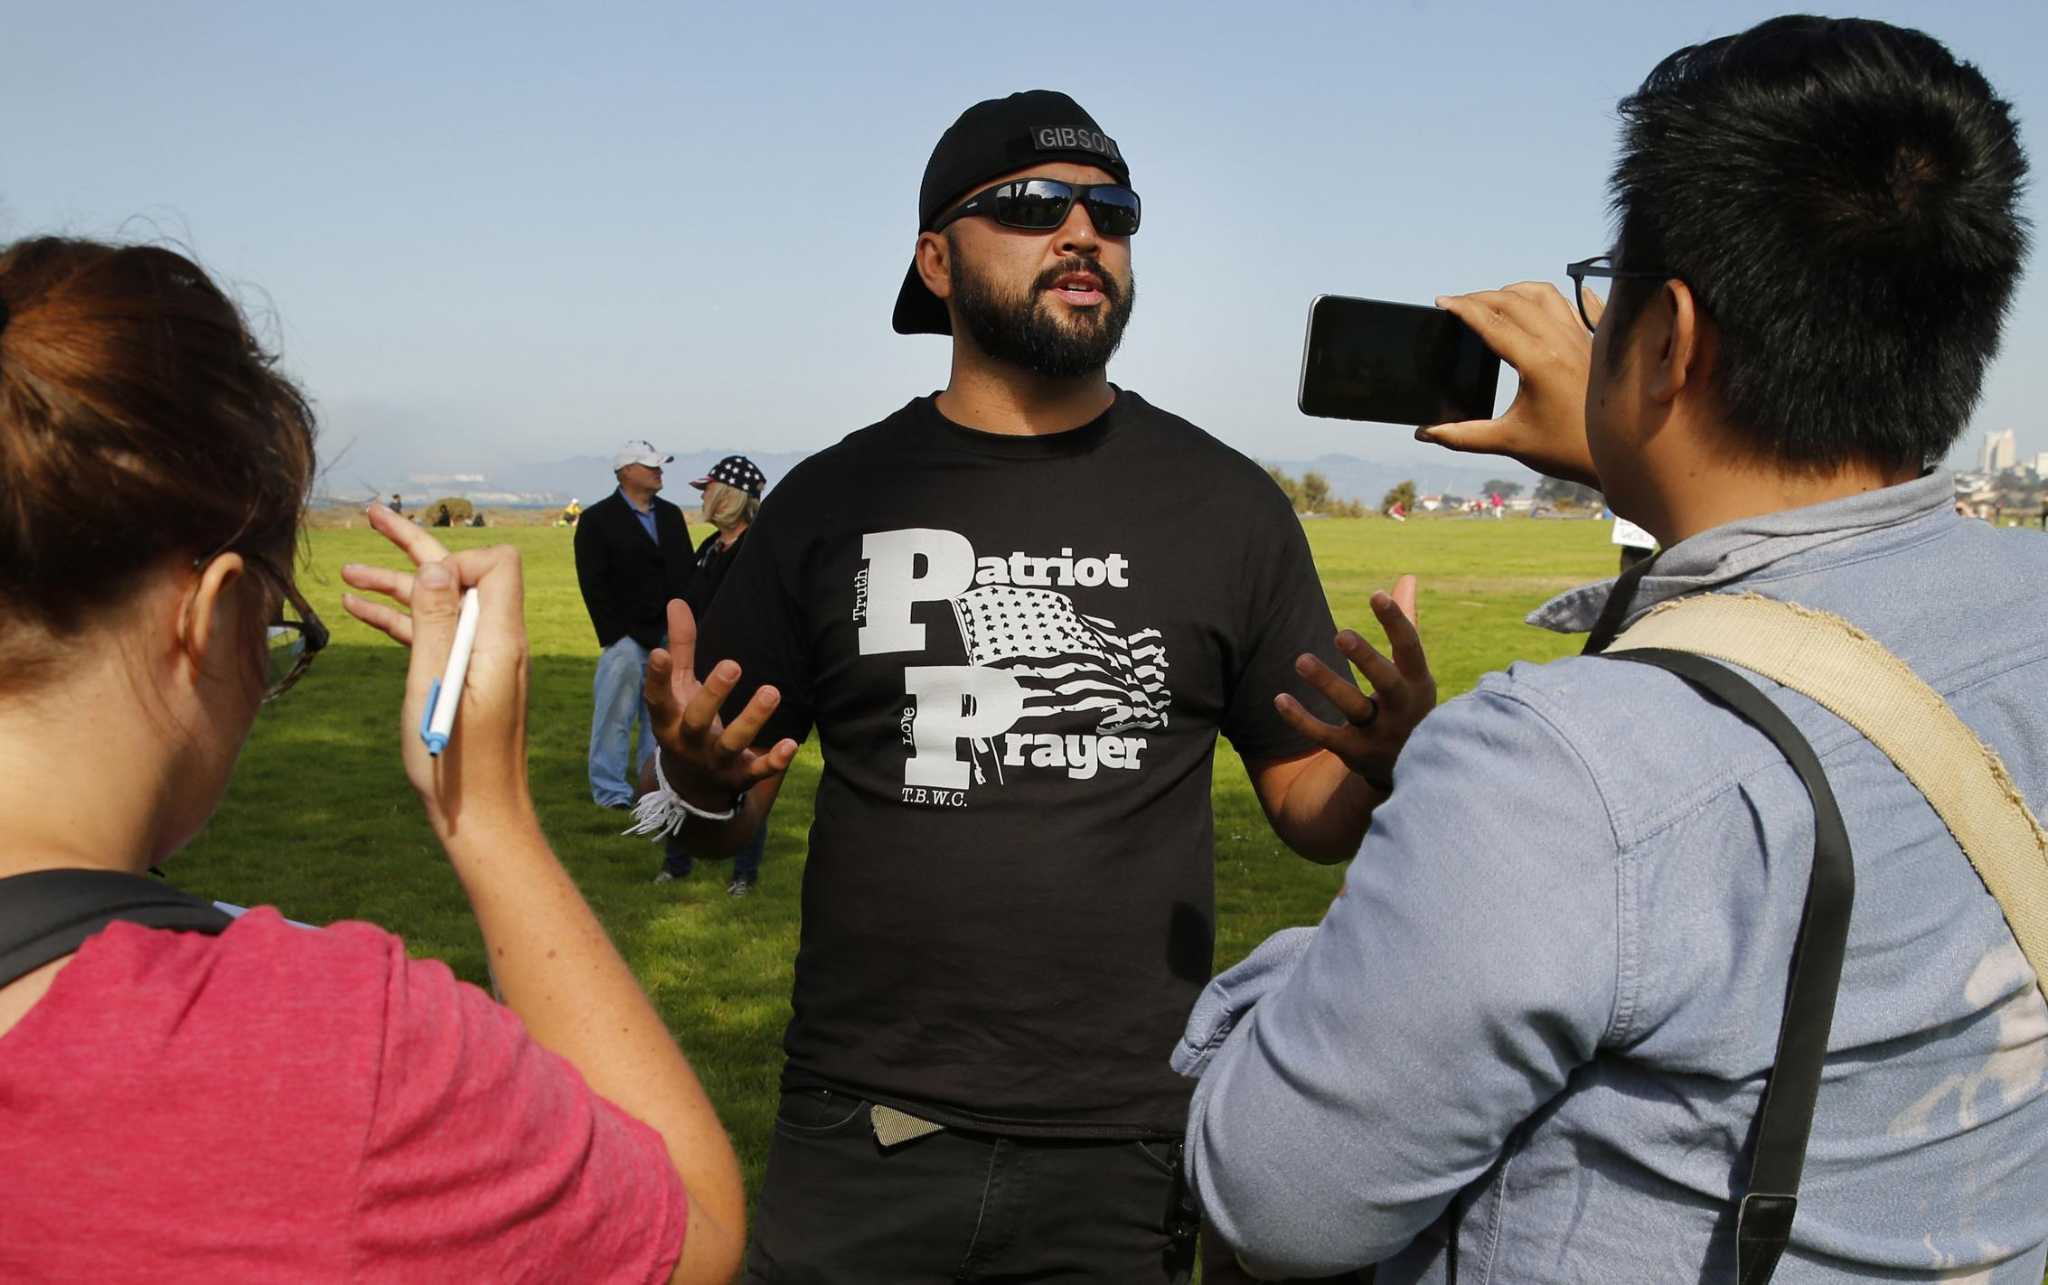 Patriot Prayer Leader Ends Up At Crissy Field After All 0818